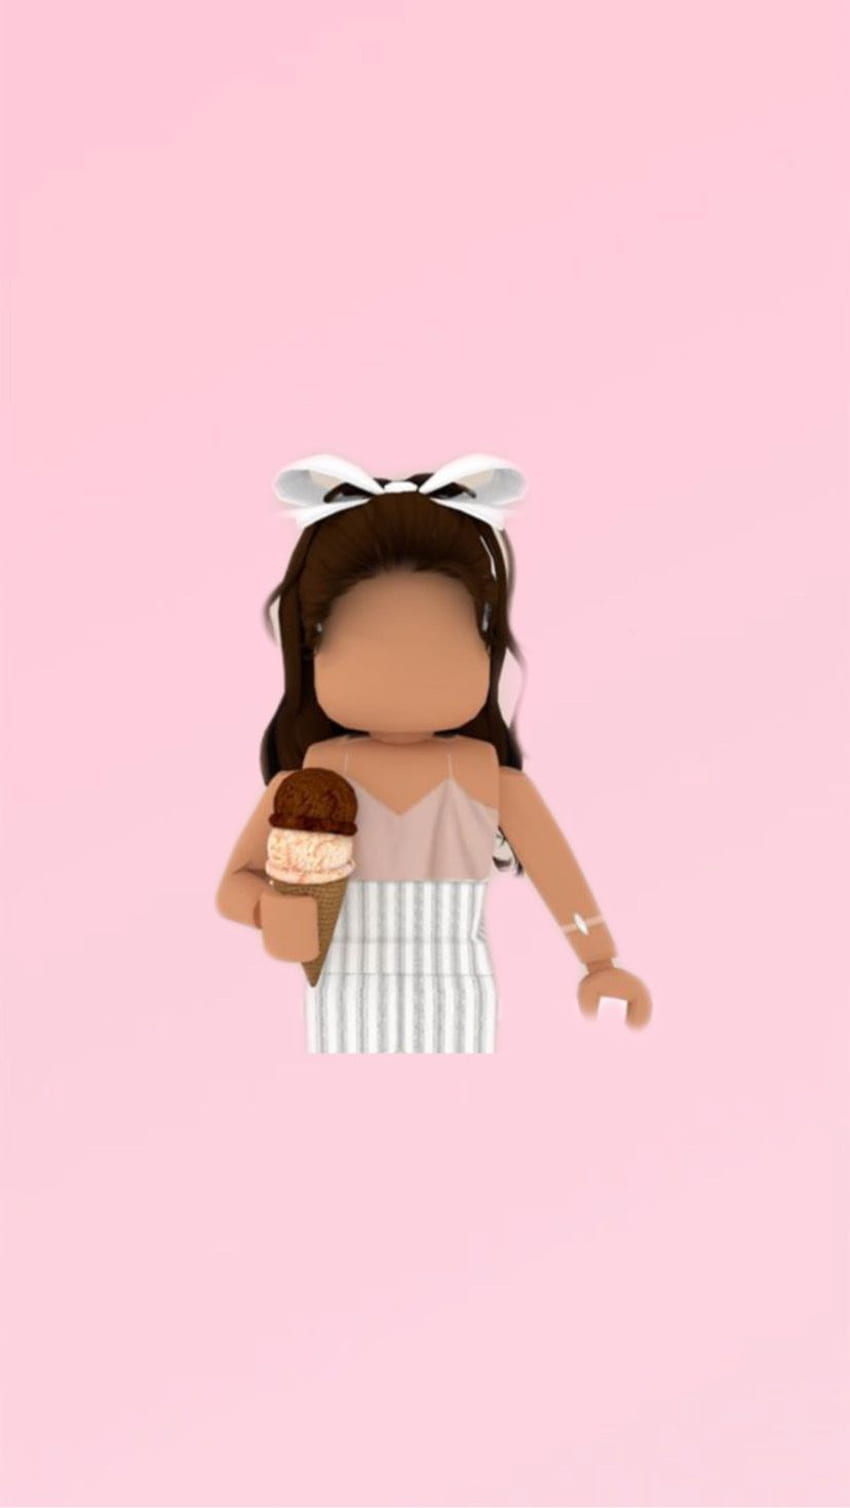 Cute Roblox For Girls / 12 Roblox Girls On afari / We have 84 ...